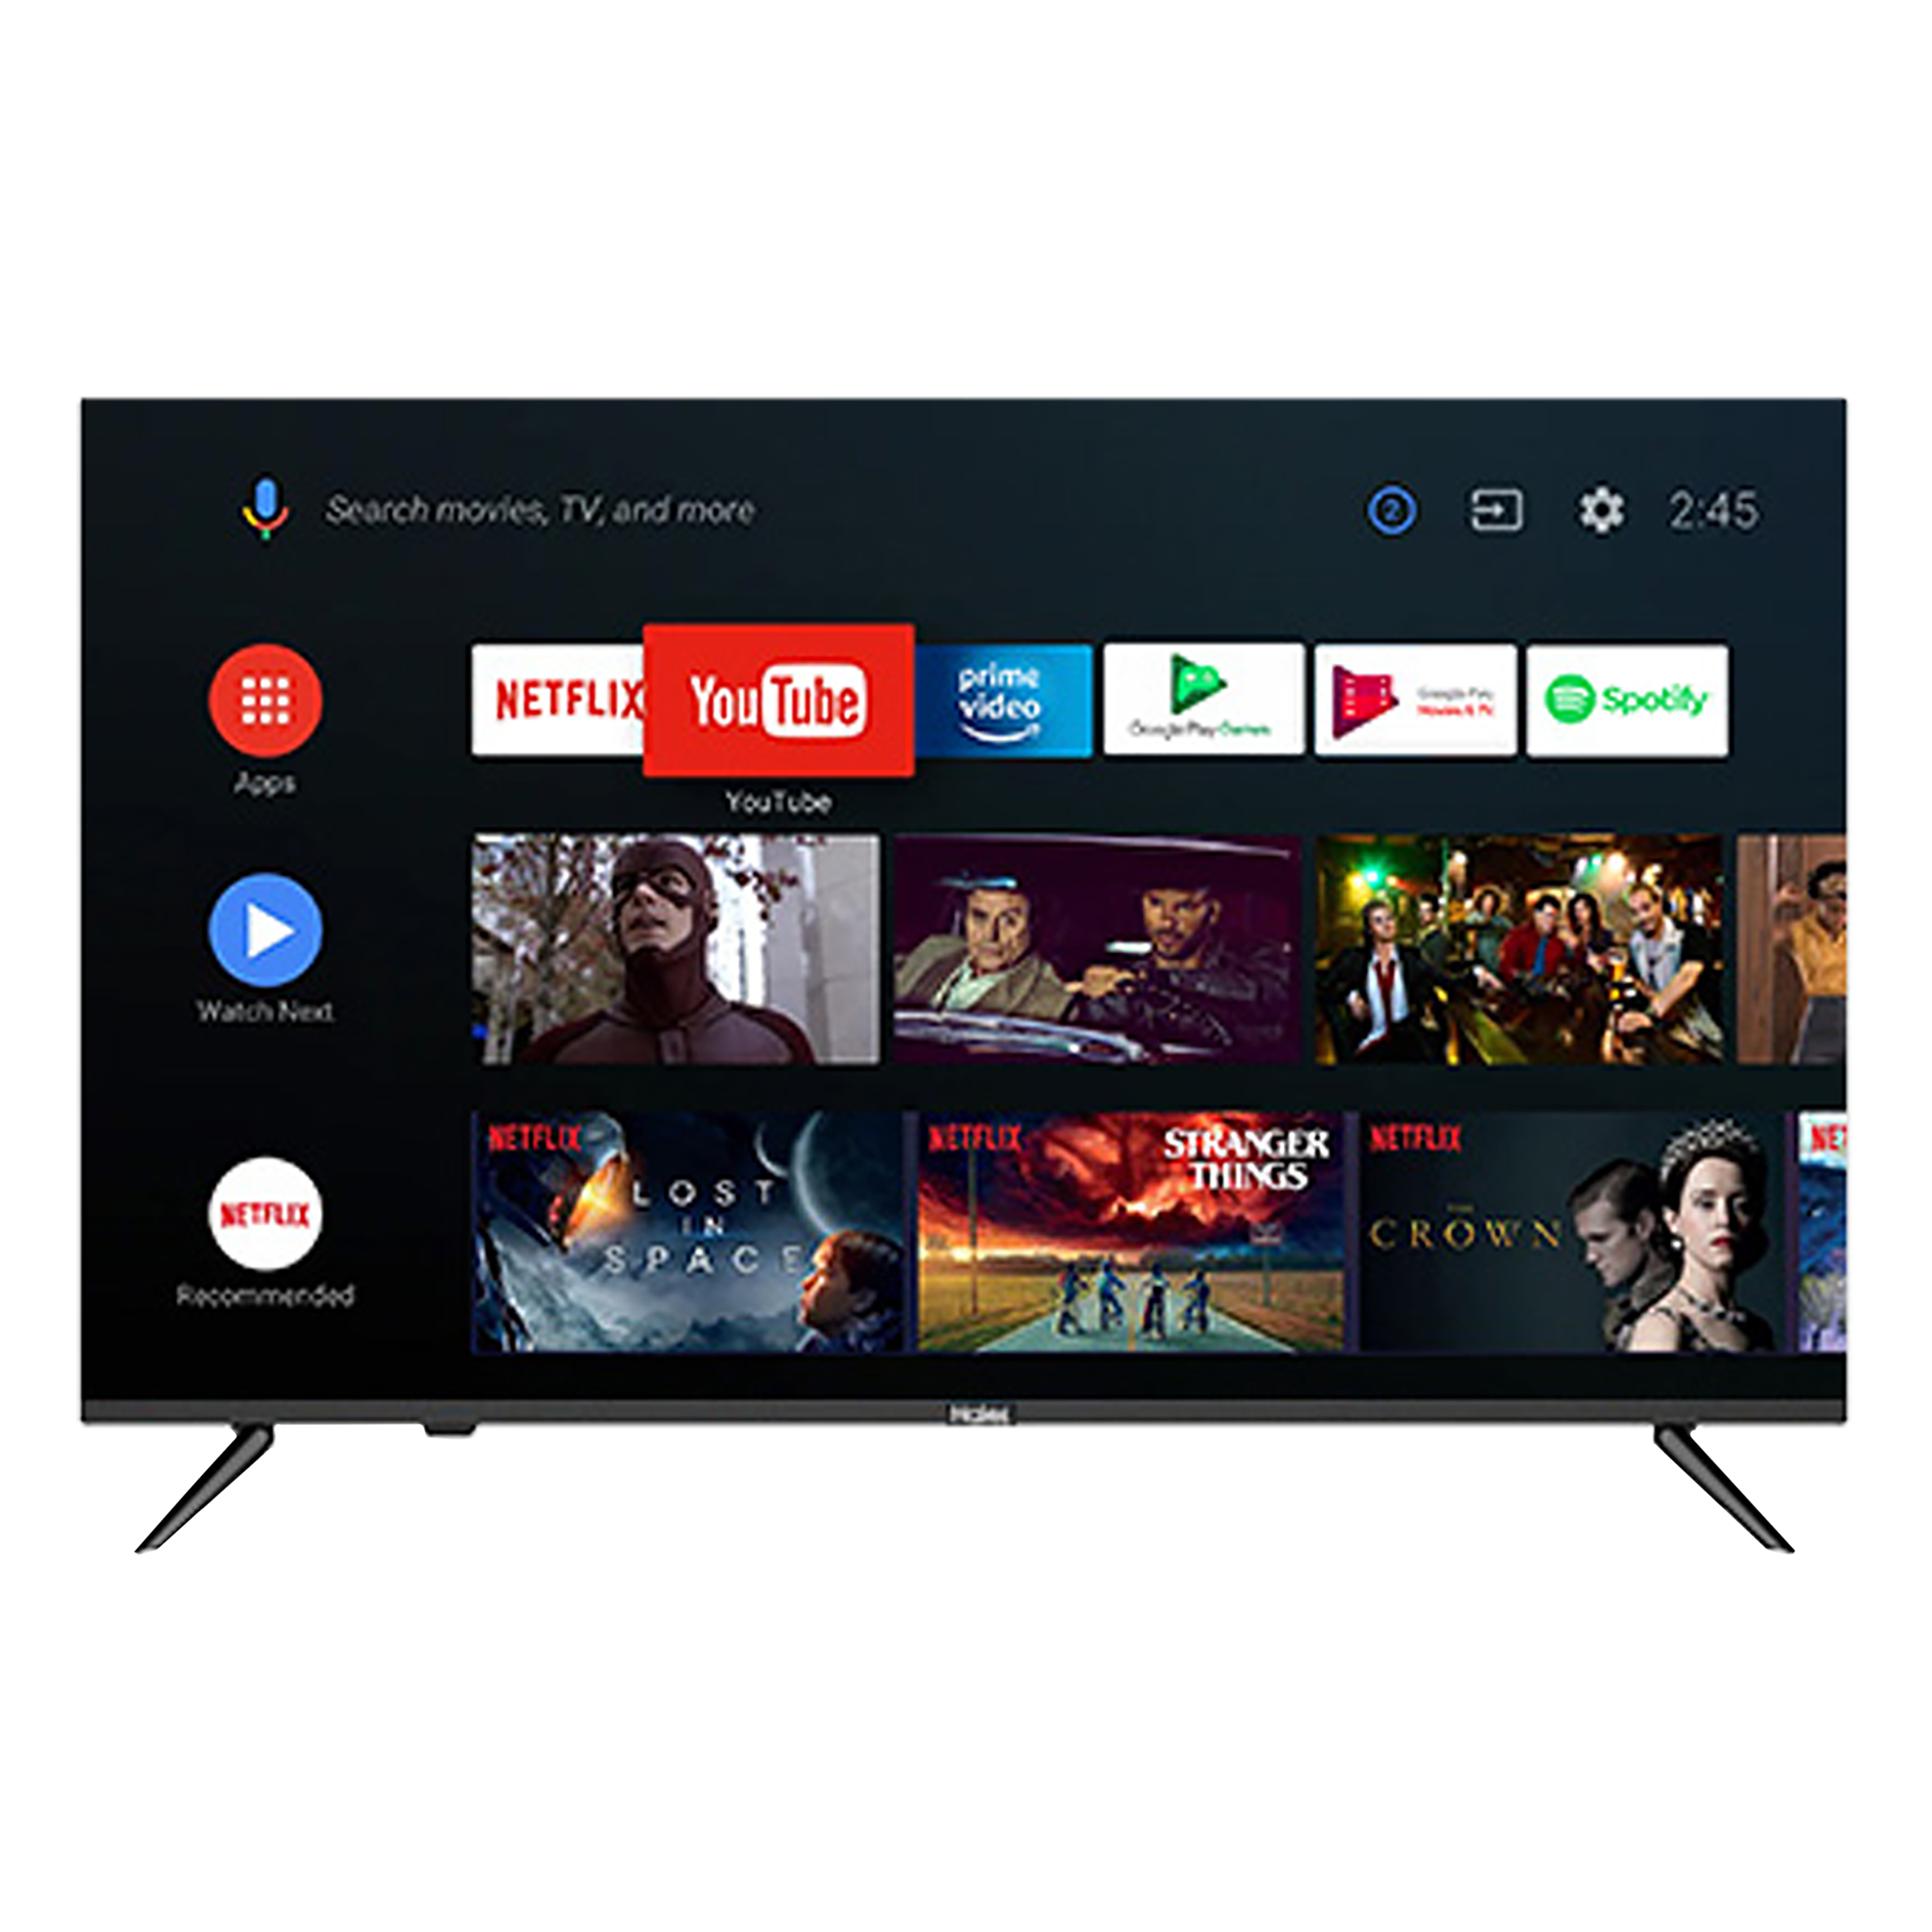 Haier K6600 Series 108 cm (43 inch) 4K Ultra HD LED Android TV with Google Assistant (2020 model)_1